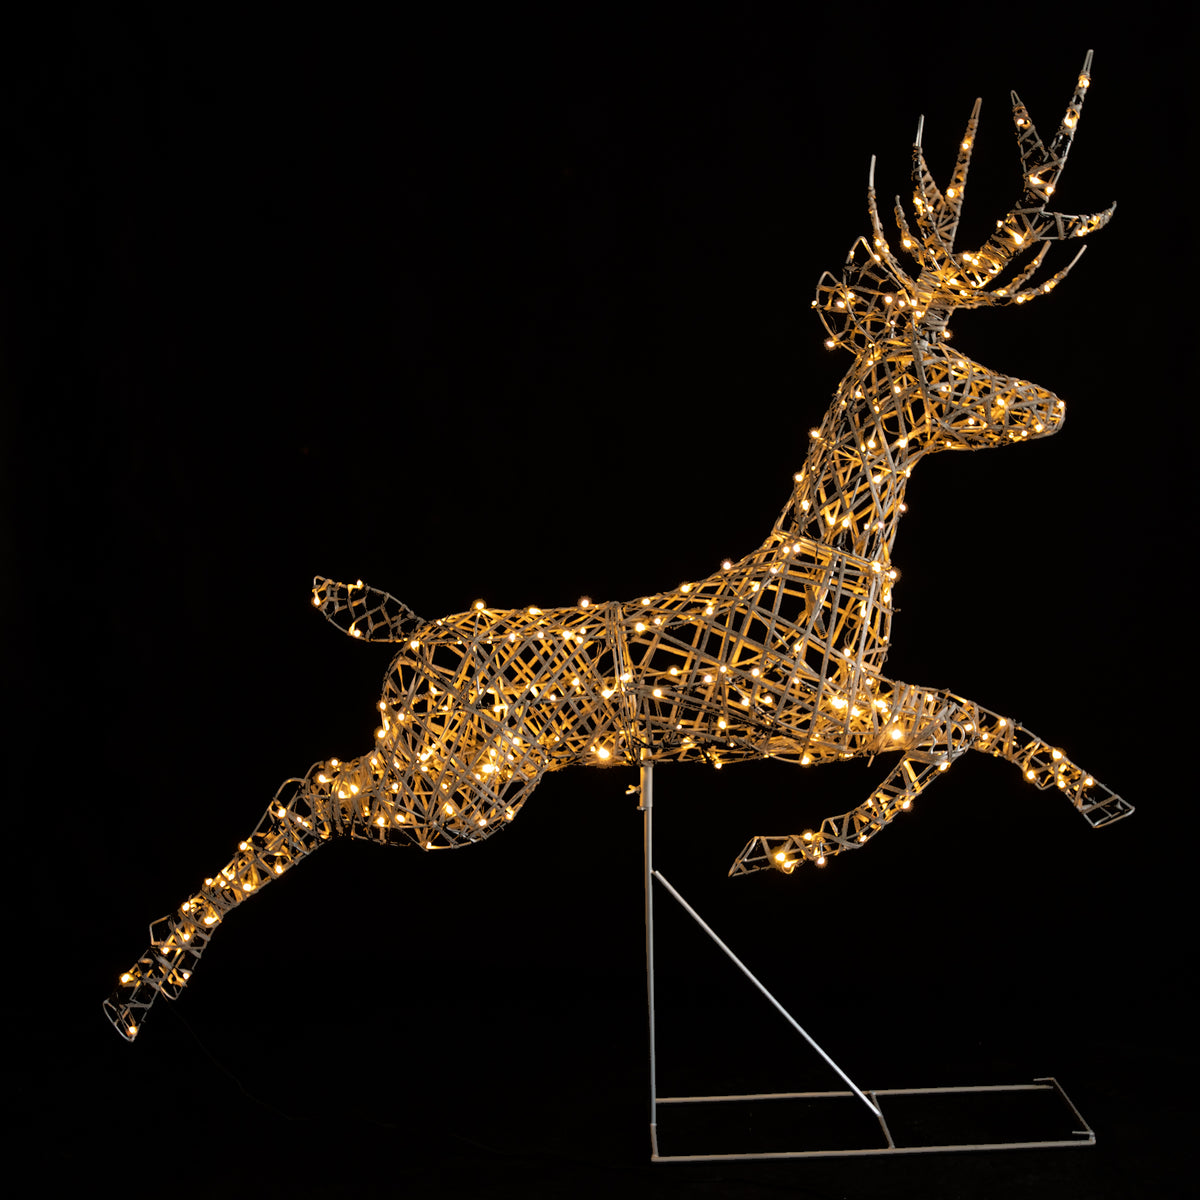 1.5M Grey Wicker Outdoor Light Up Christmas Leaping Stag With 300 White LEDS